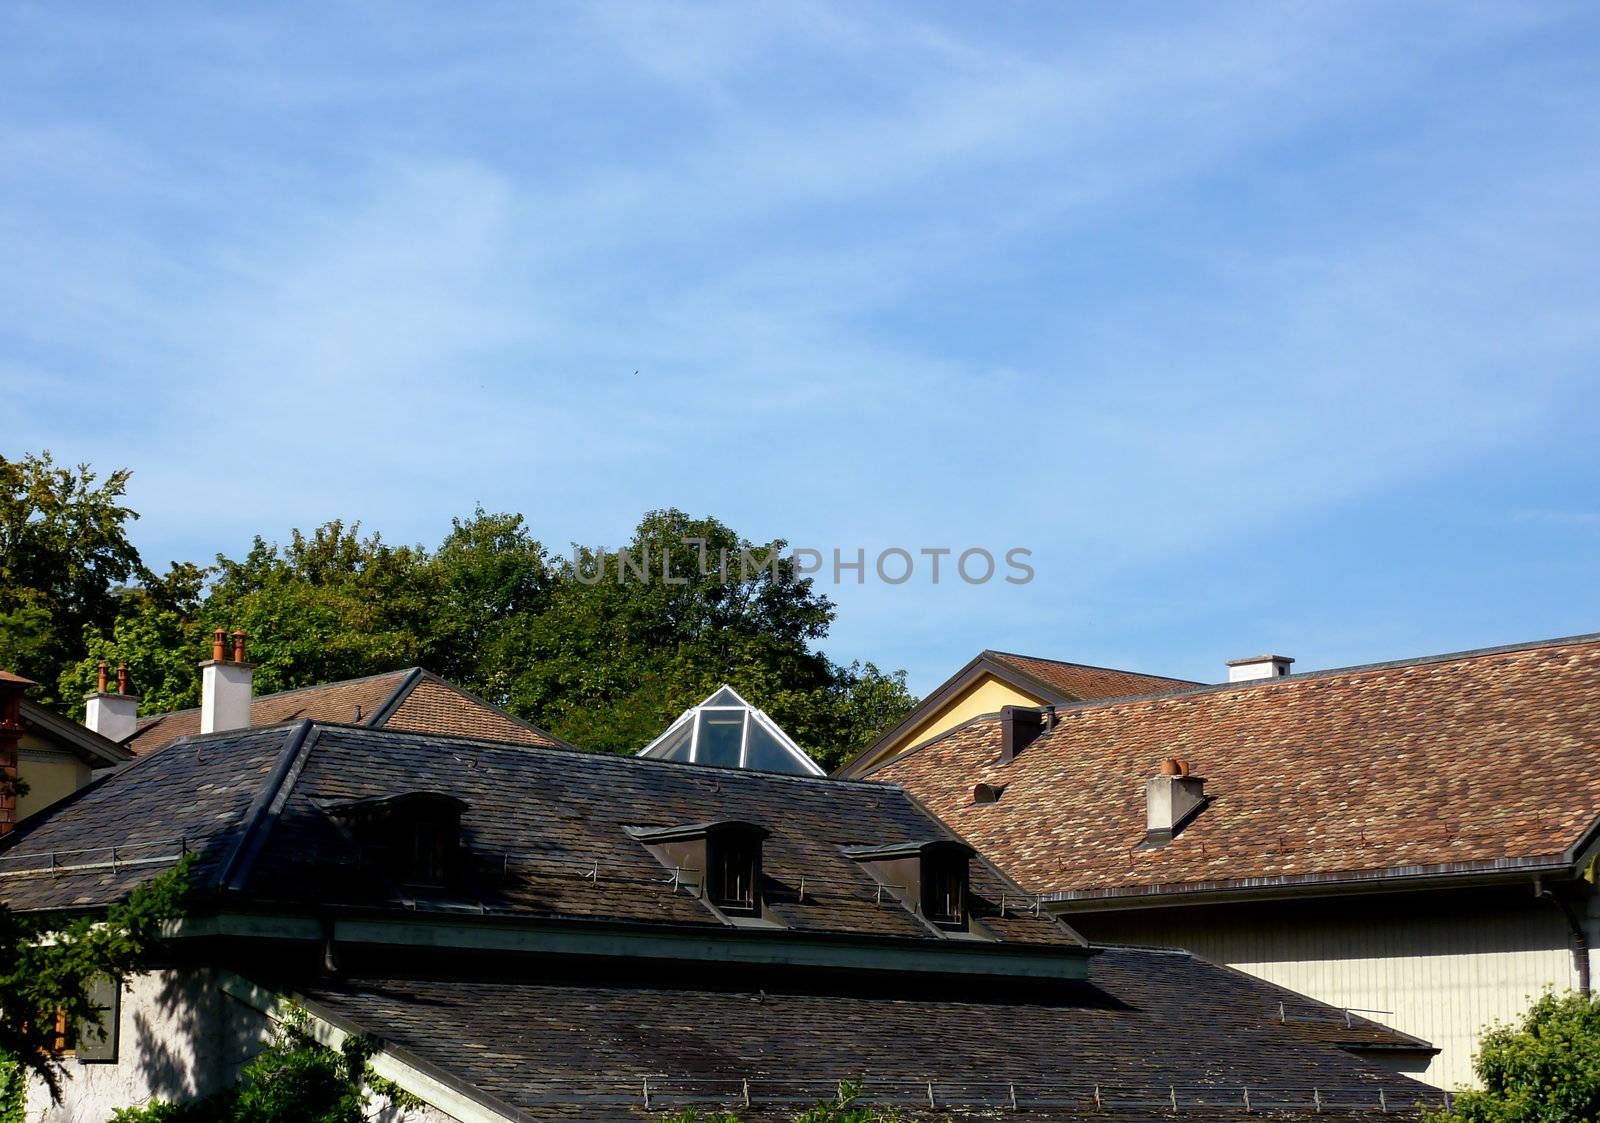 Brown roofs made of tiles among trees by little cloudy weather